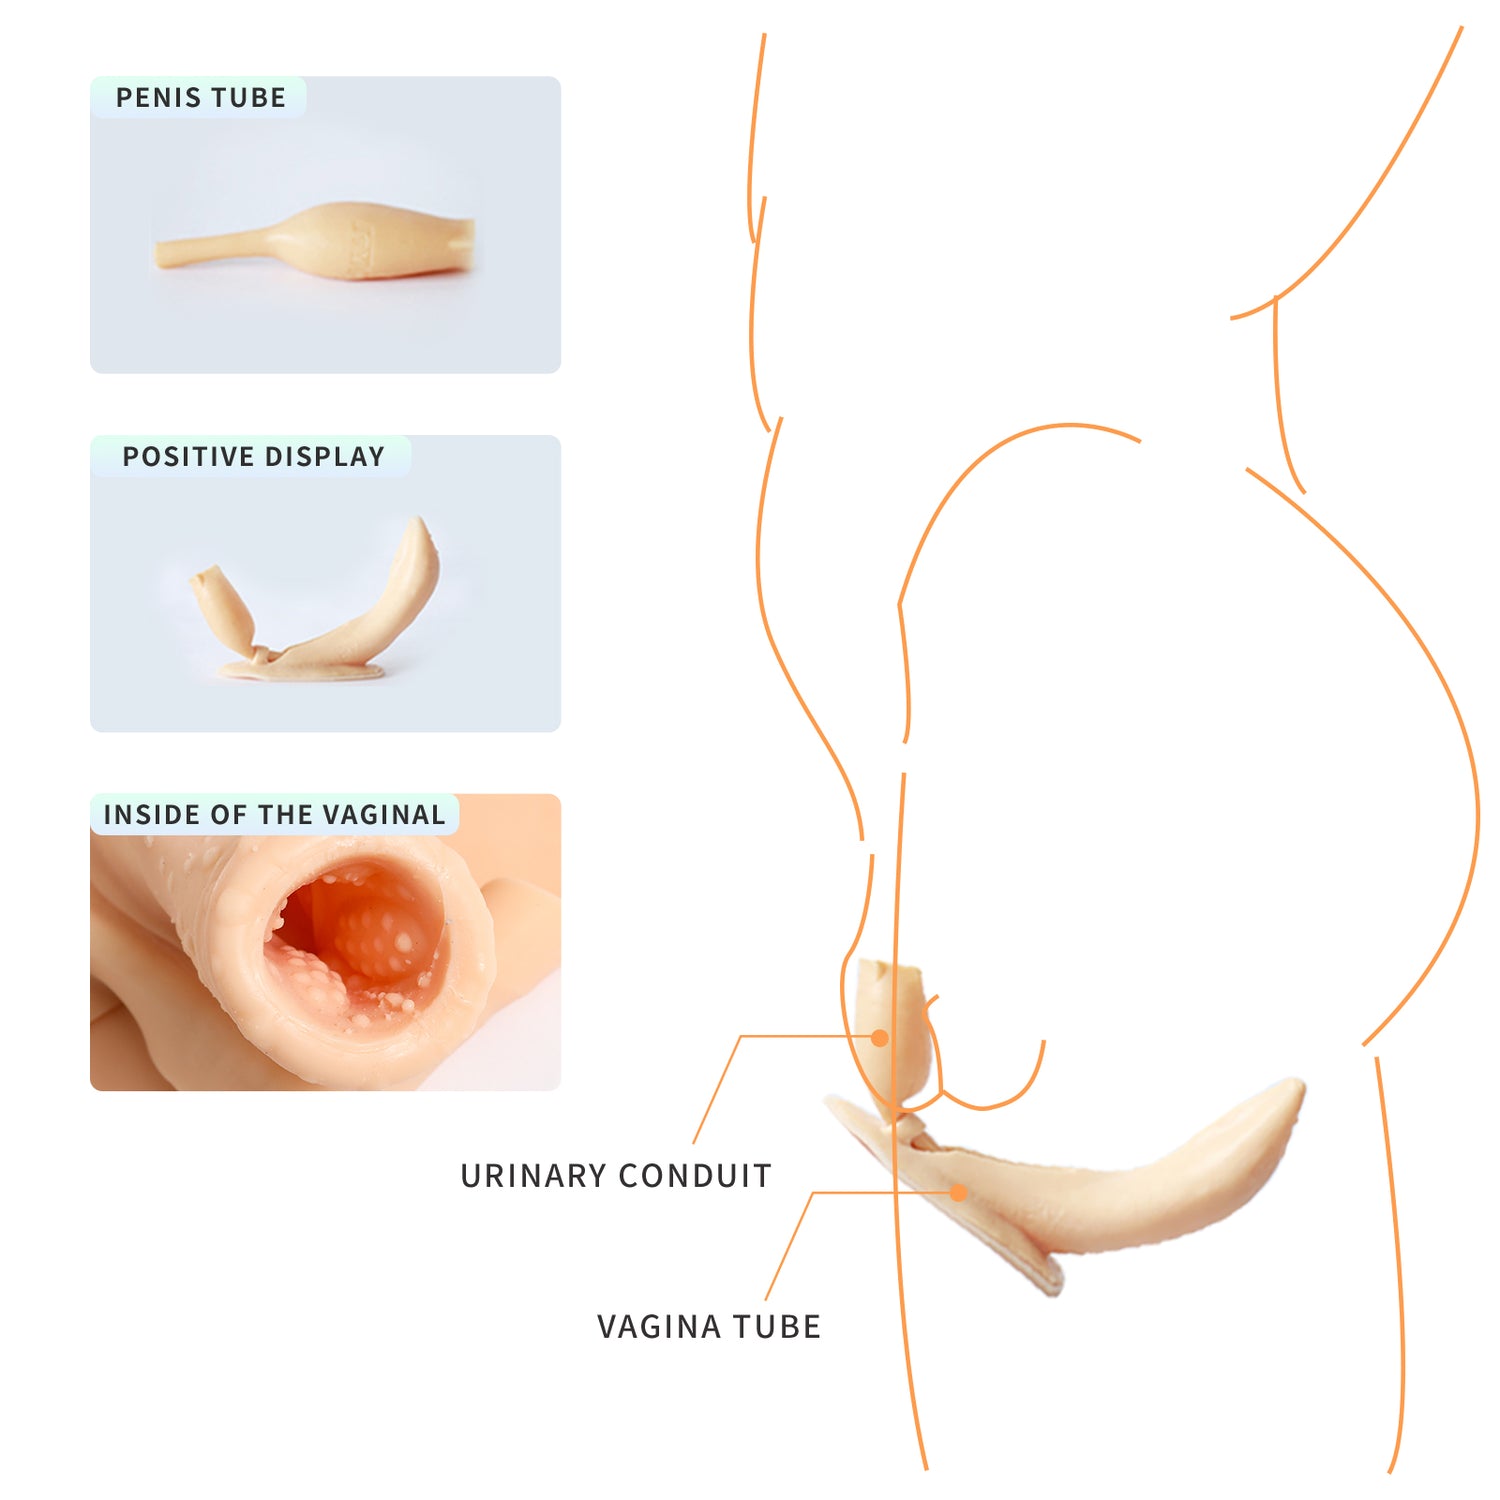 Catheter and Vaginal insert for penetration